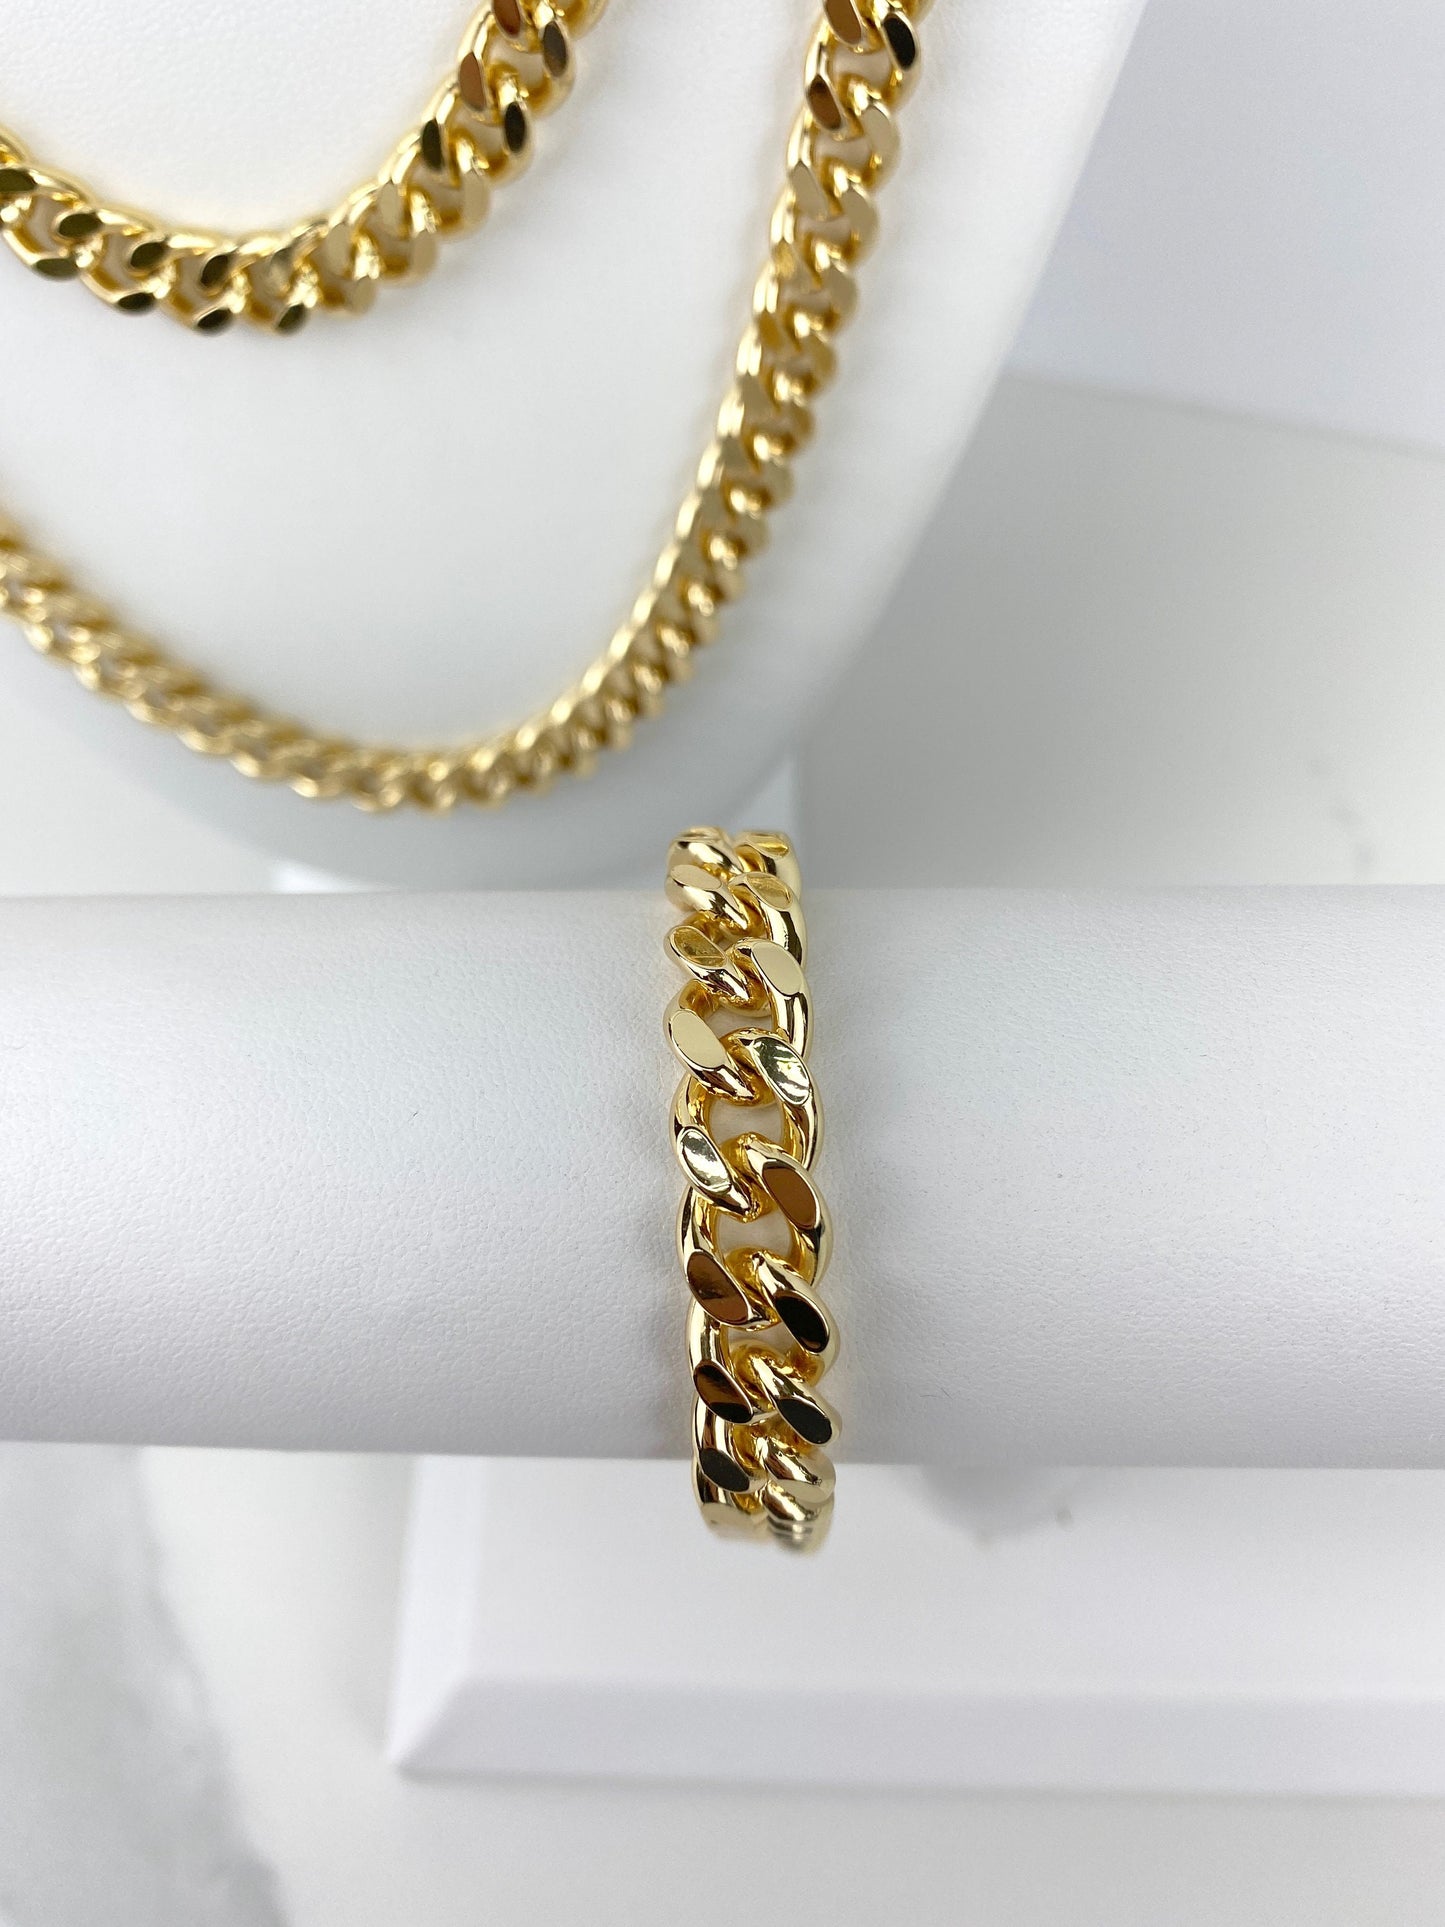 18k Gold Filled 9mm Miami Cuban Link Chain or Bracelet, Unisex Curb Link Chain, Lobster Claw, Wholesale Jewelry Making Supplies